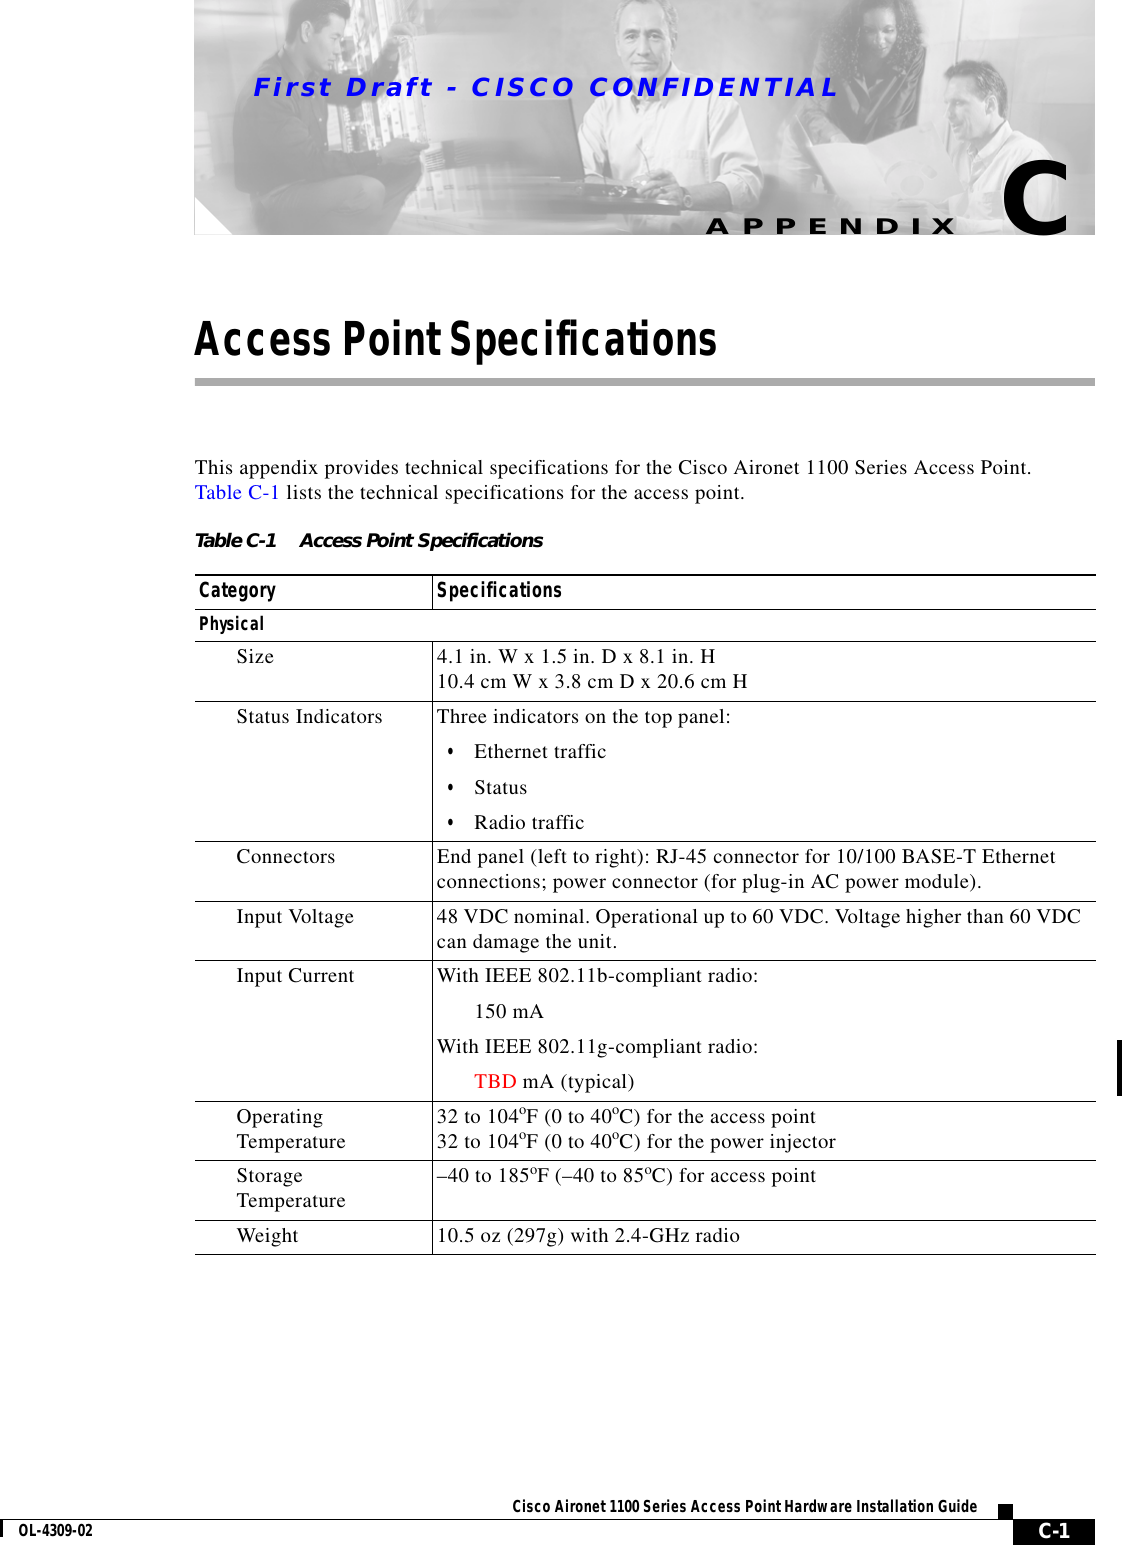 First Draft - CISCO CONFIDENTIALC-1Cisco Aironet 1100 Series Access Point Hardware Installation GuideOL-4309-02APPENDIXCAccess Point SpecificationsThis appendix provides technical specifications for the Cisco Aironet 1100 Series Access Point. Table C-1 lists the technical specifications for the access point.Table C-1 Access Point SpecificationsCategory SpecificationsPhysicalSize 4.1 in. W x 1.5 in. D x 8.1 in. H 10.4 cm W x 3.8 cm D x 20.6 cm HStatus Indicators Three indicators on the top panel:•Ethernet traffic•Status•Radio trafficConnectors End panel (left to right): RJ-45 connector for 10/100 BASE-T Ethernet connections; power connector (for plug-in AC power module).Input Voltage  48 VDC nominal. Operational up to 60 VDC. Voltage higher than 60 VDC can damage the unit.Input Current With IEEE 802.11b-compliant radio:150 mA With IEEE 802.11g-compliant radio:TBD mA (typical)OperatingTemperature 32 to 104oF (0 to 40oC) for the access point 32 to 104oF (0 to 40oC) for the power injectorStorageTemperature  –40 to 185oF (–40 to 85oC) for access point Weight 10.5 oz (297g) with 2.4-GHz radio